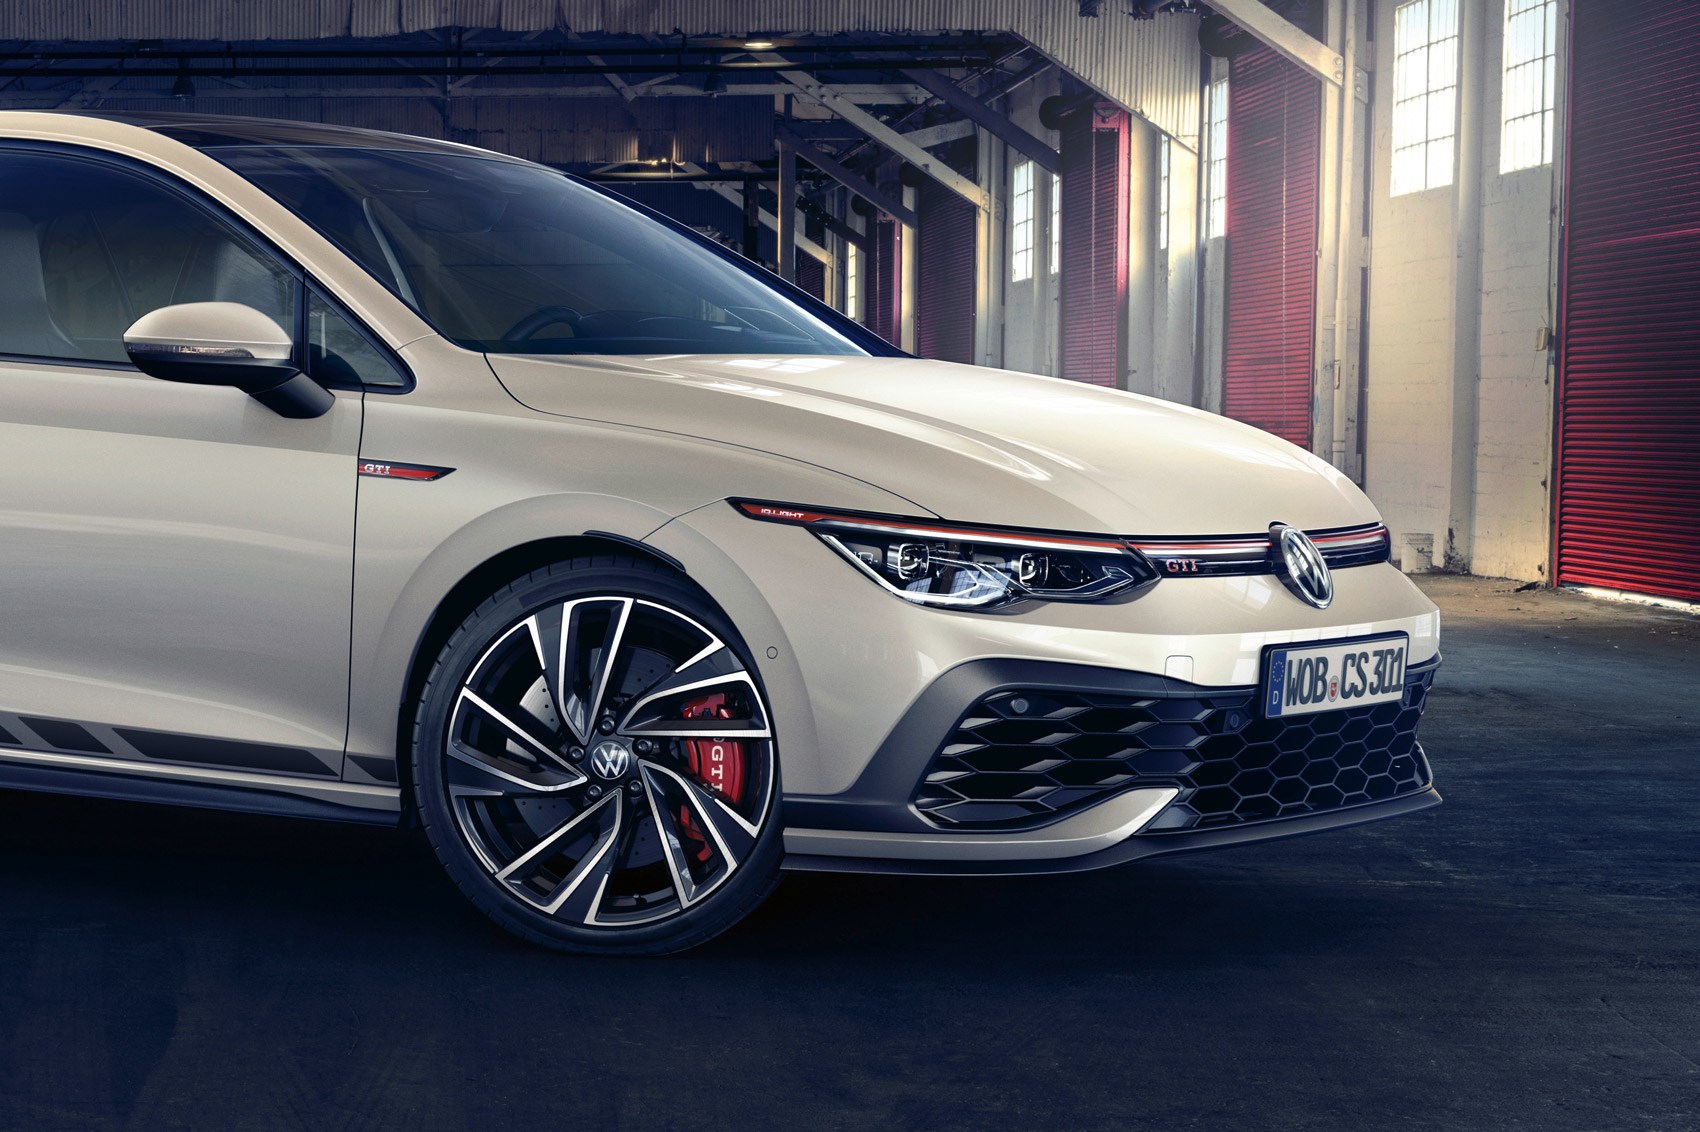 2022 Volkswagen Golf GTI Will Have Loads of New Standard Features